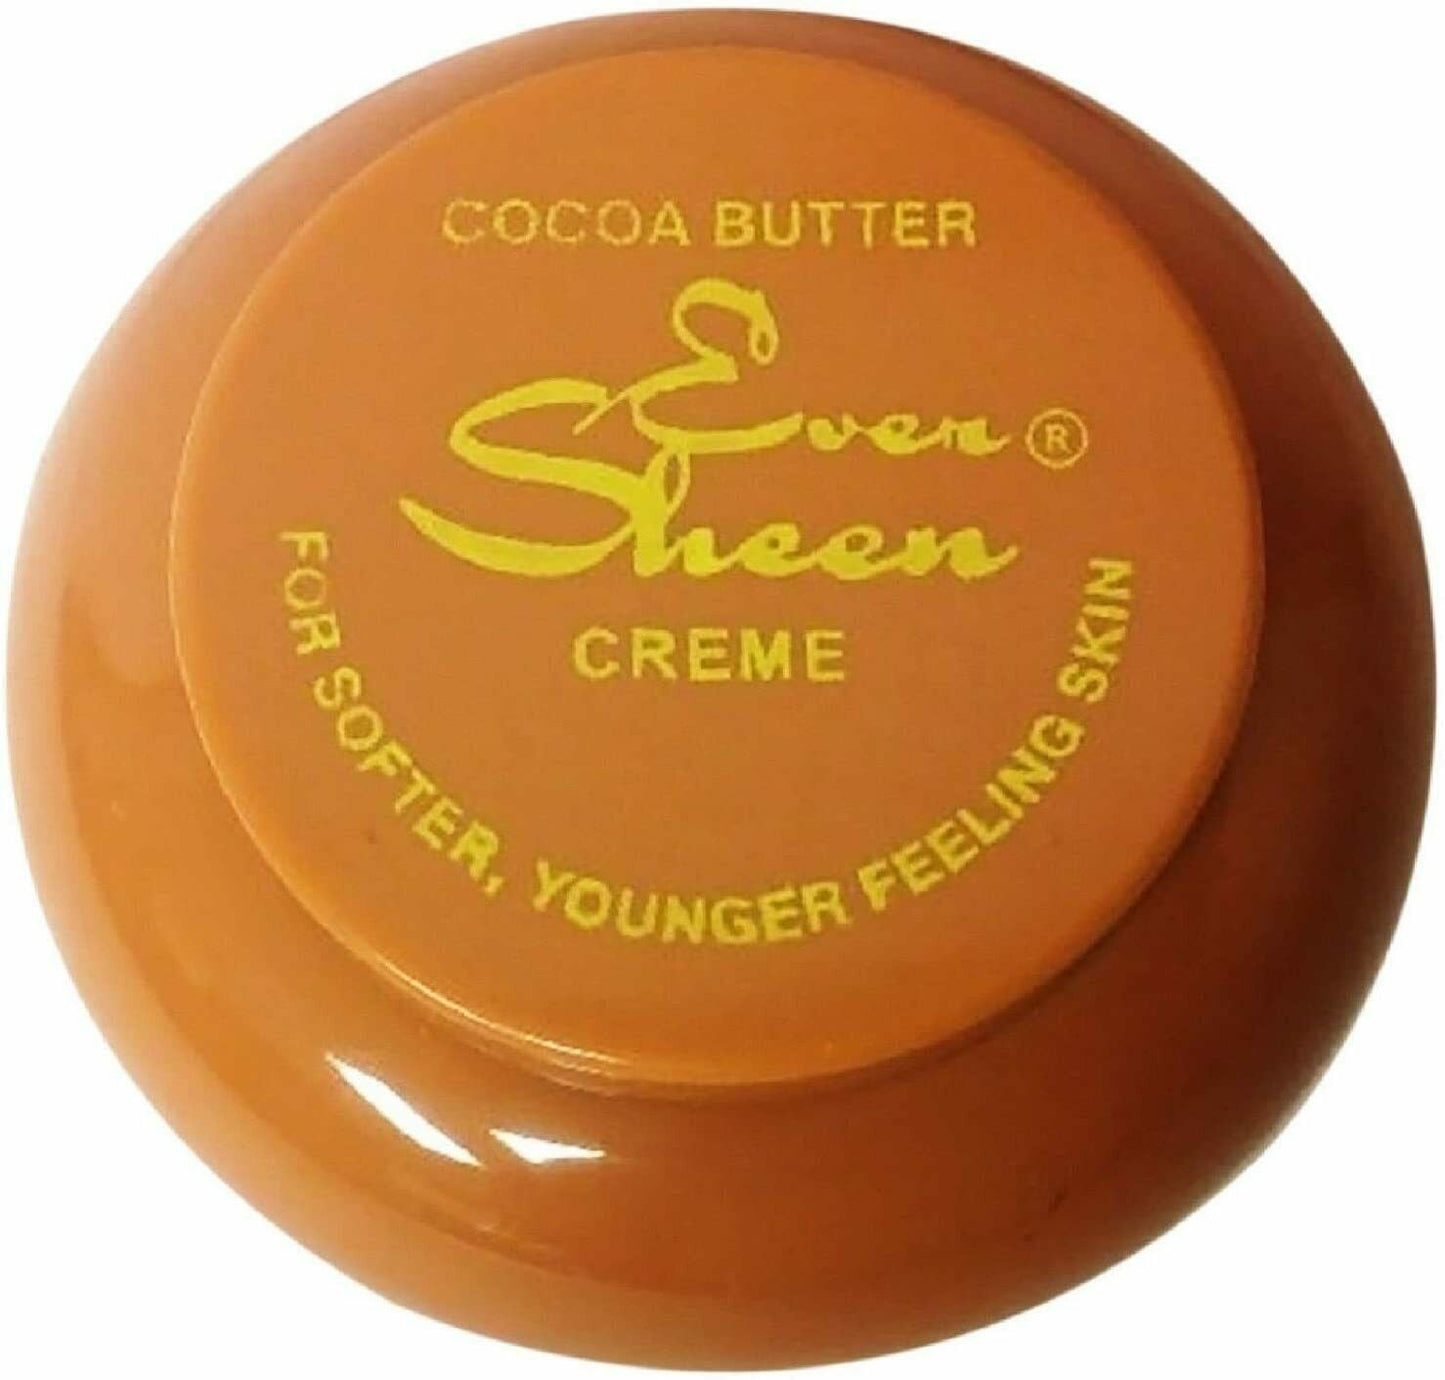 Sheen Cocoa Butter Creme For A Softer Younger Skin- 250ml